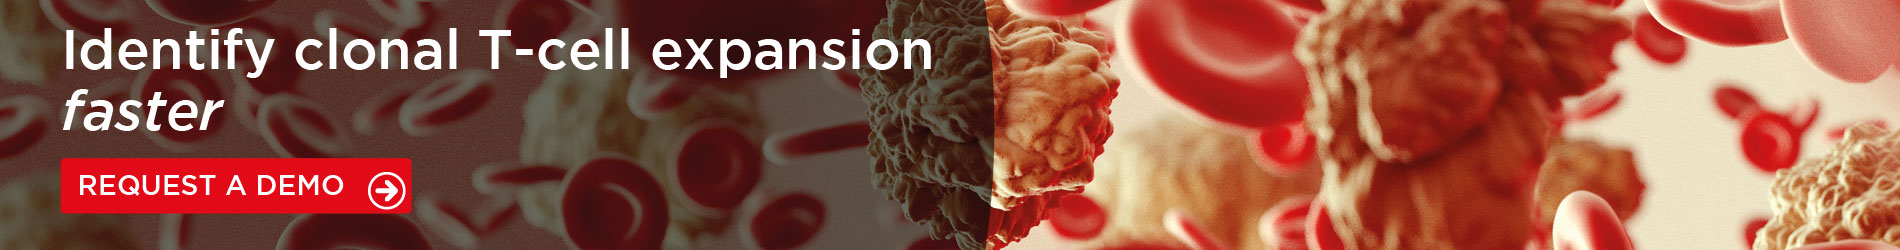 Identify clonal T-cell expansion faster, request a demo banner